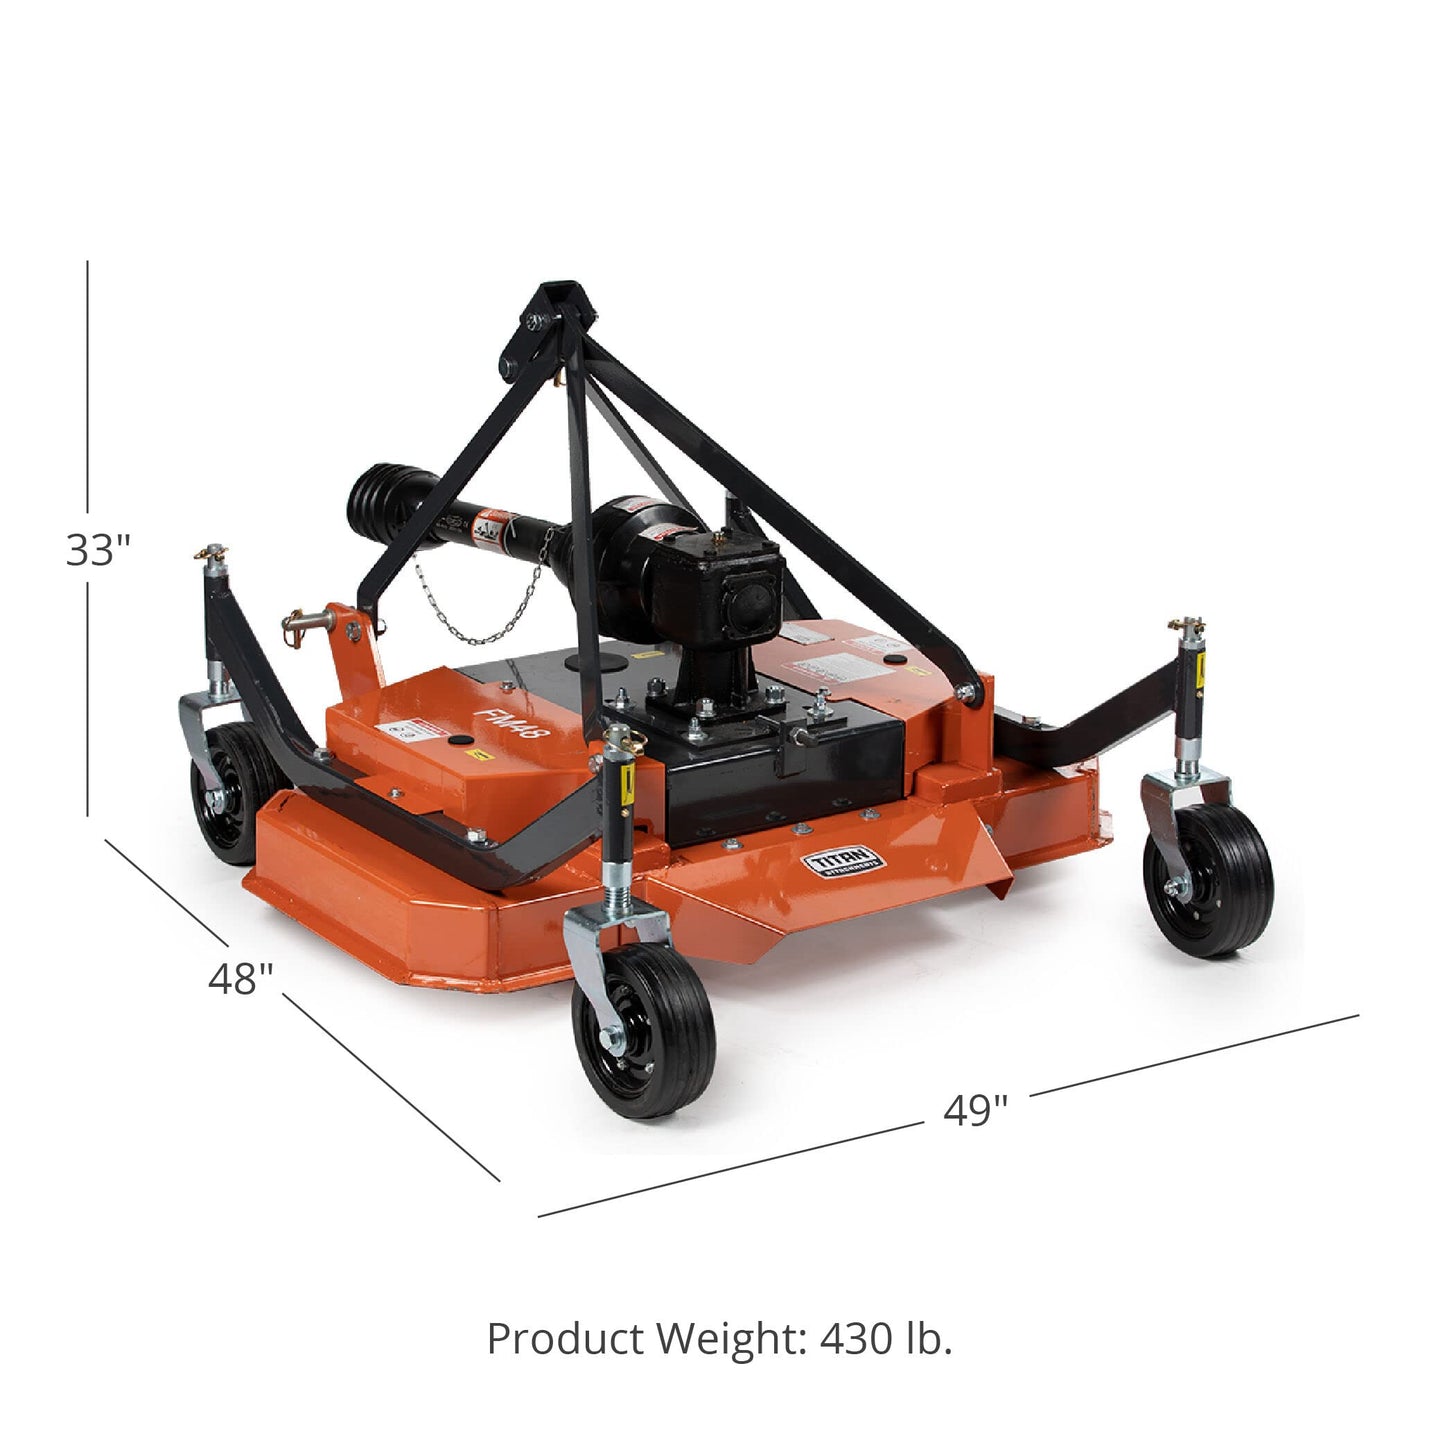 Titan Attachments 3 Point PTO Finish Mower, 48" Cutting Width, Category 1 Hitch, Rear Discharge, Requires 18-30 HP Tractor, Low-Noise Cast Iron Gearbox